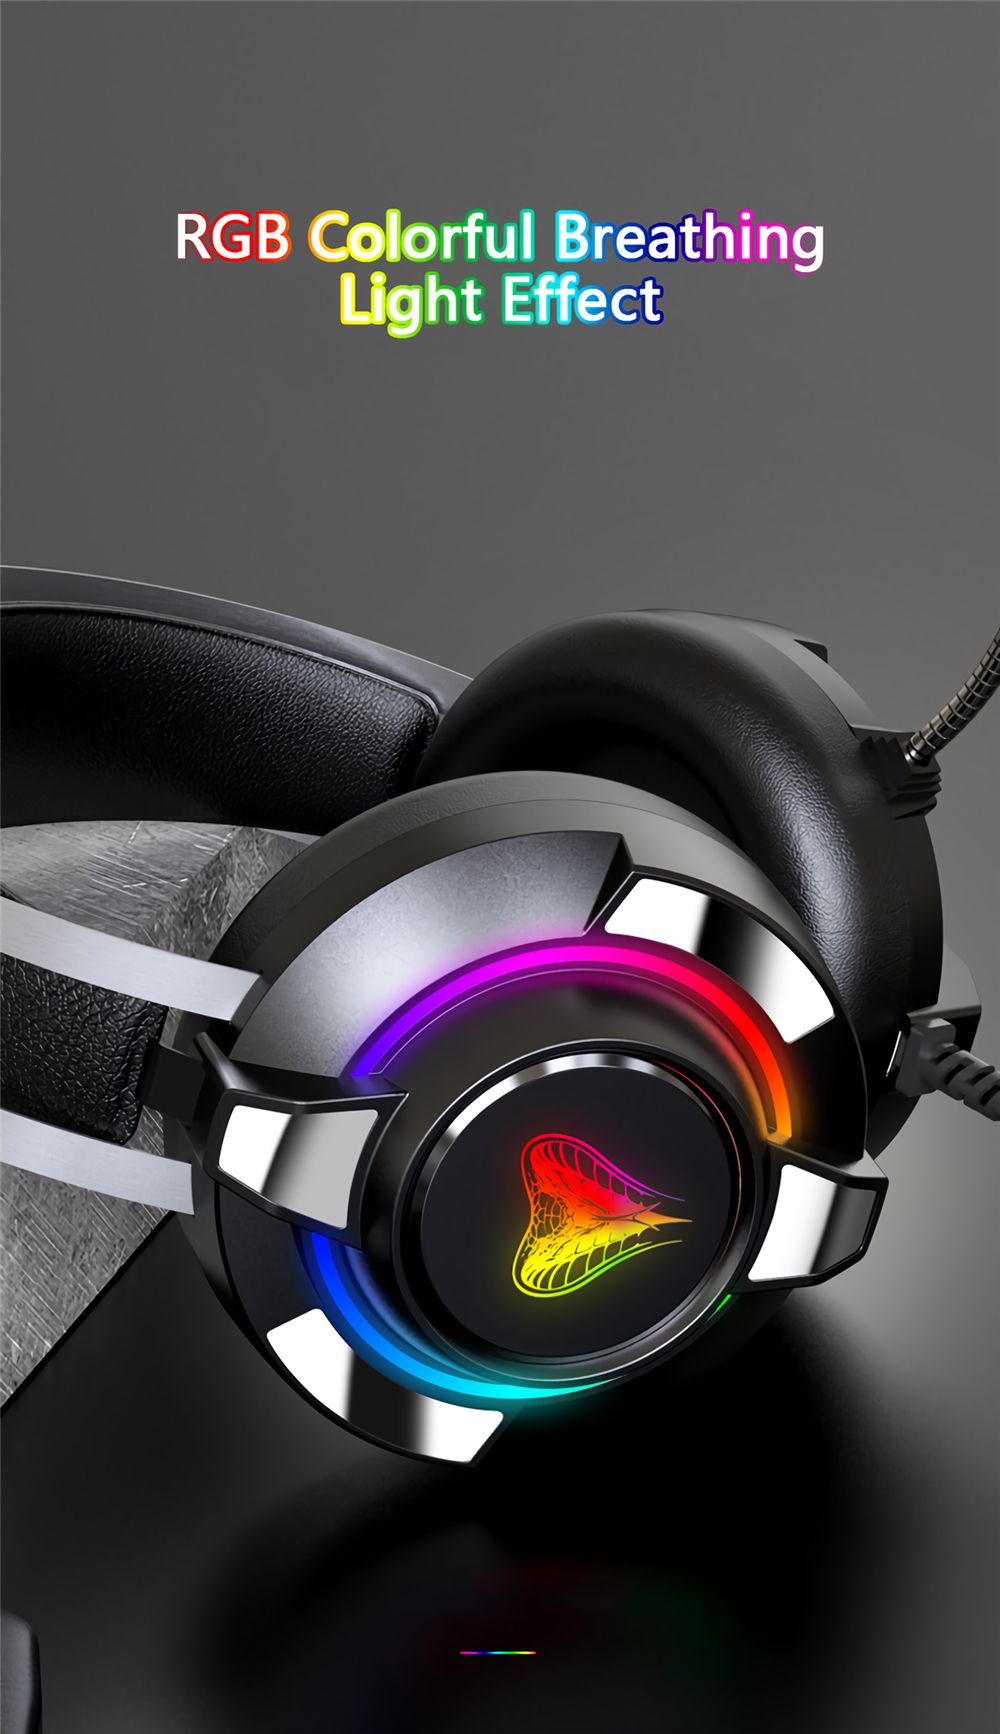 M9-71-Channel-Gaming-Headset-RGB-Wired-Game-Headphone-Adjustable-Bass-Stereo-Headset-with-Mic-for-Co-1712791